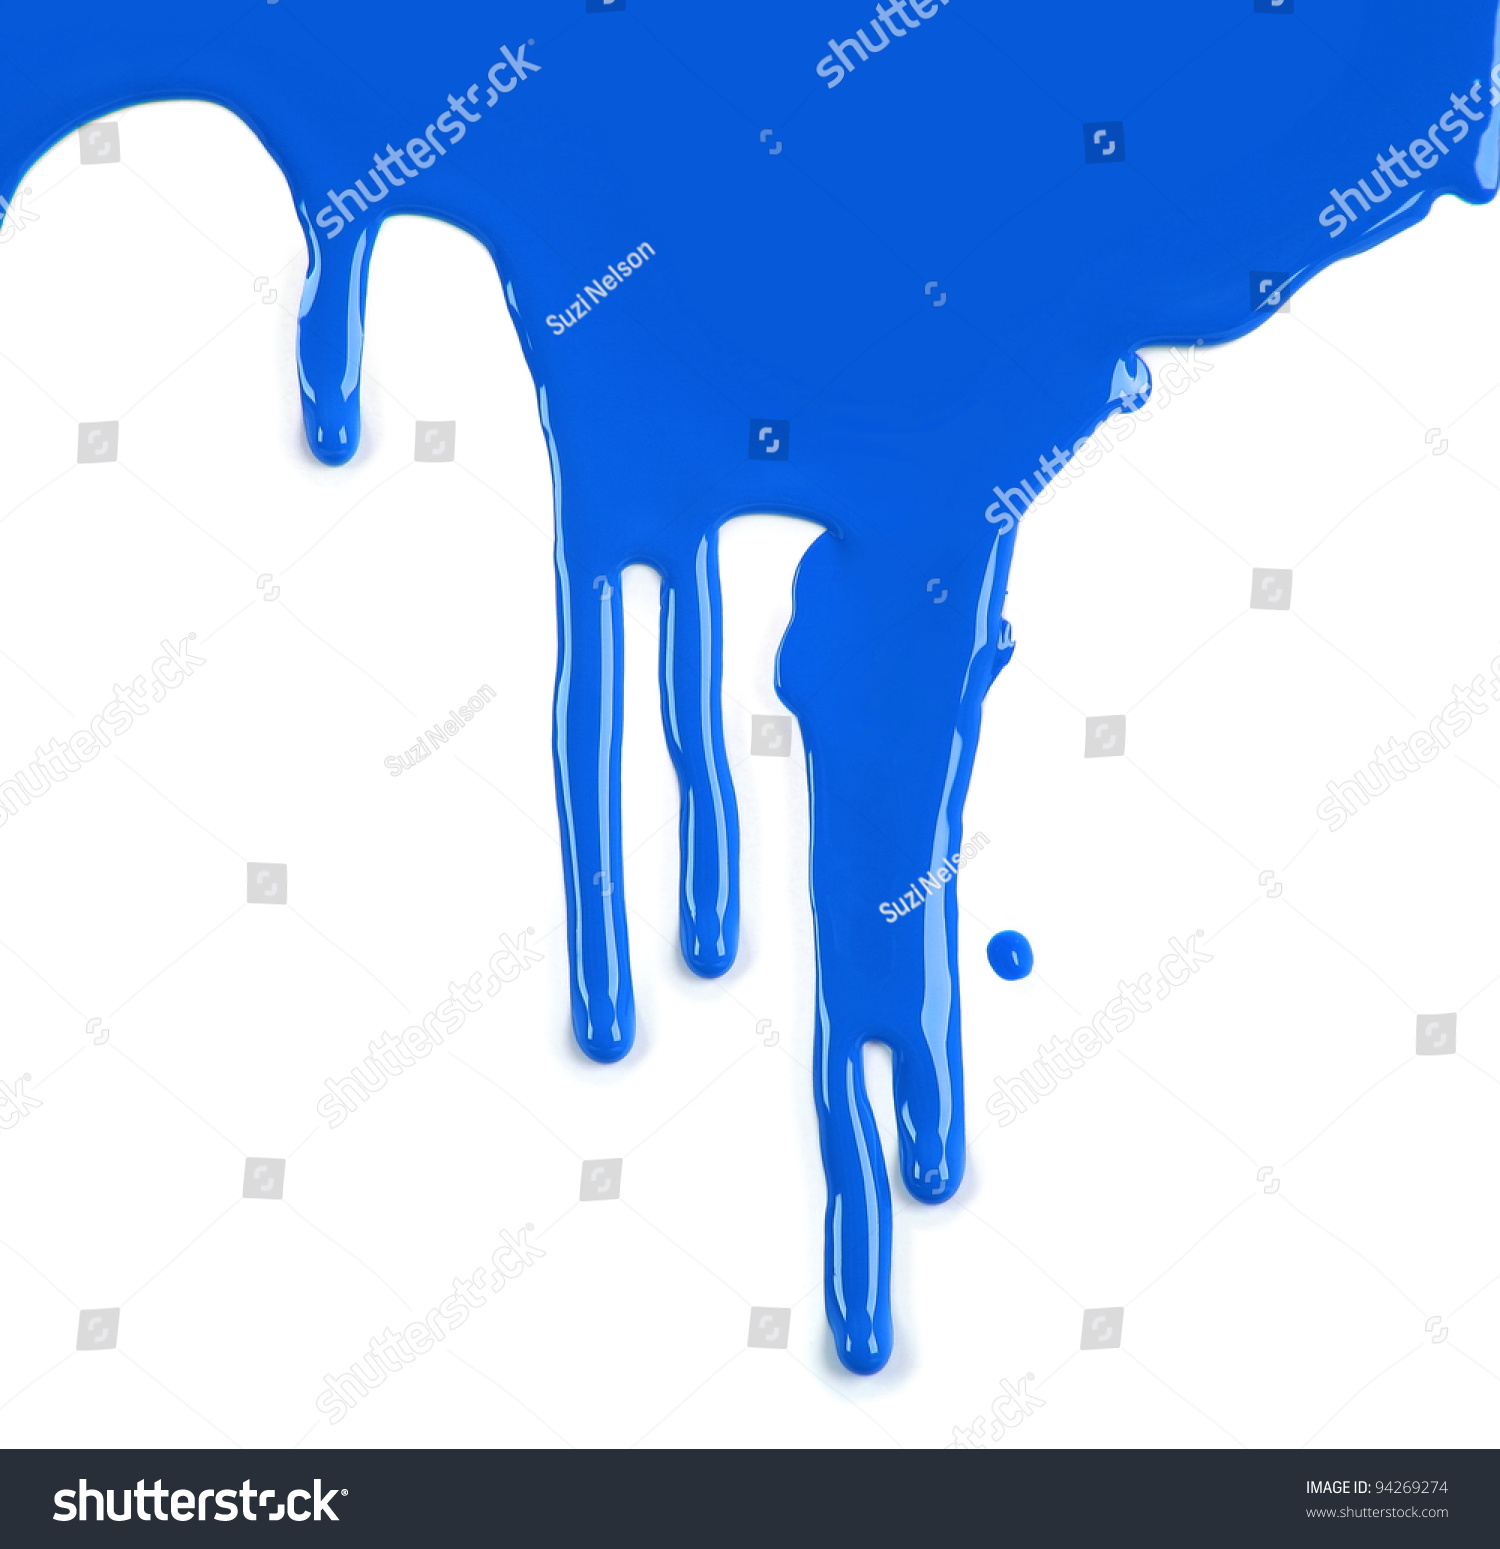 Brightly Colored Blue Paint Drips On Stock Photo 94269274 - Shutterstock